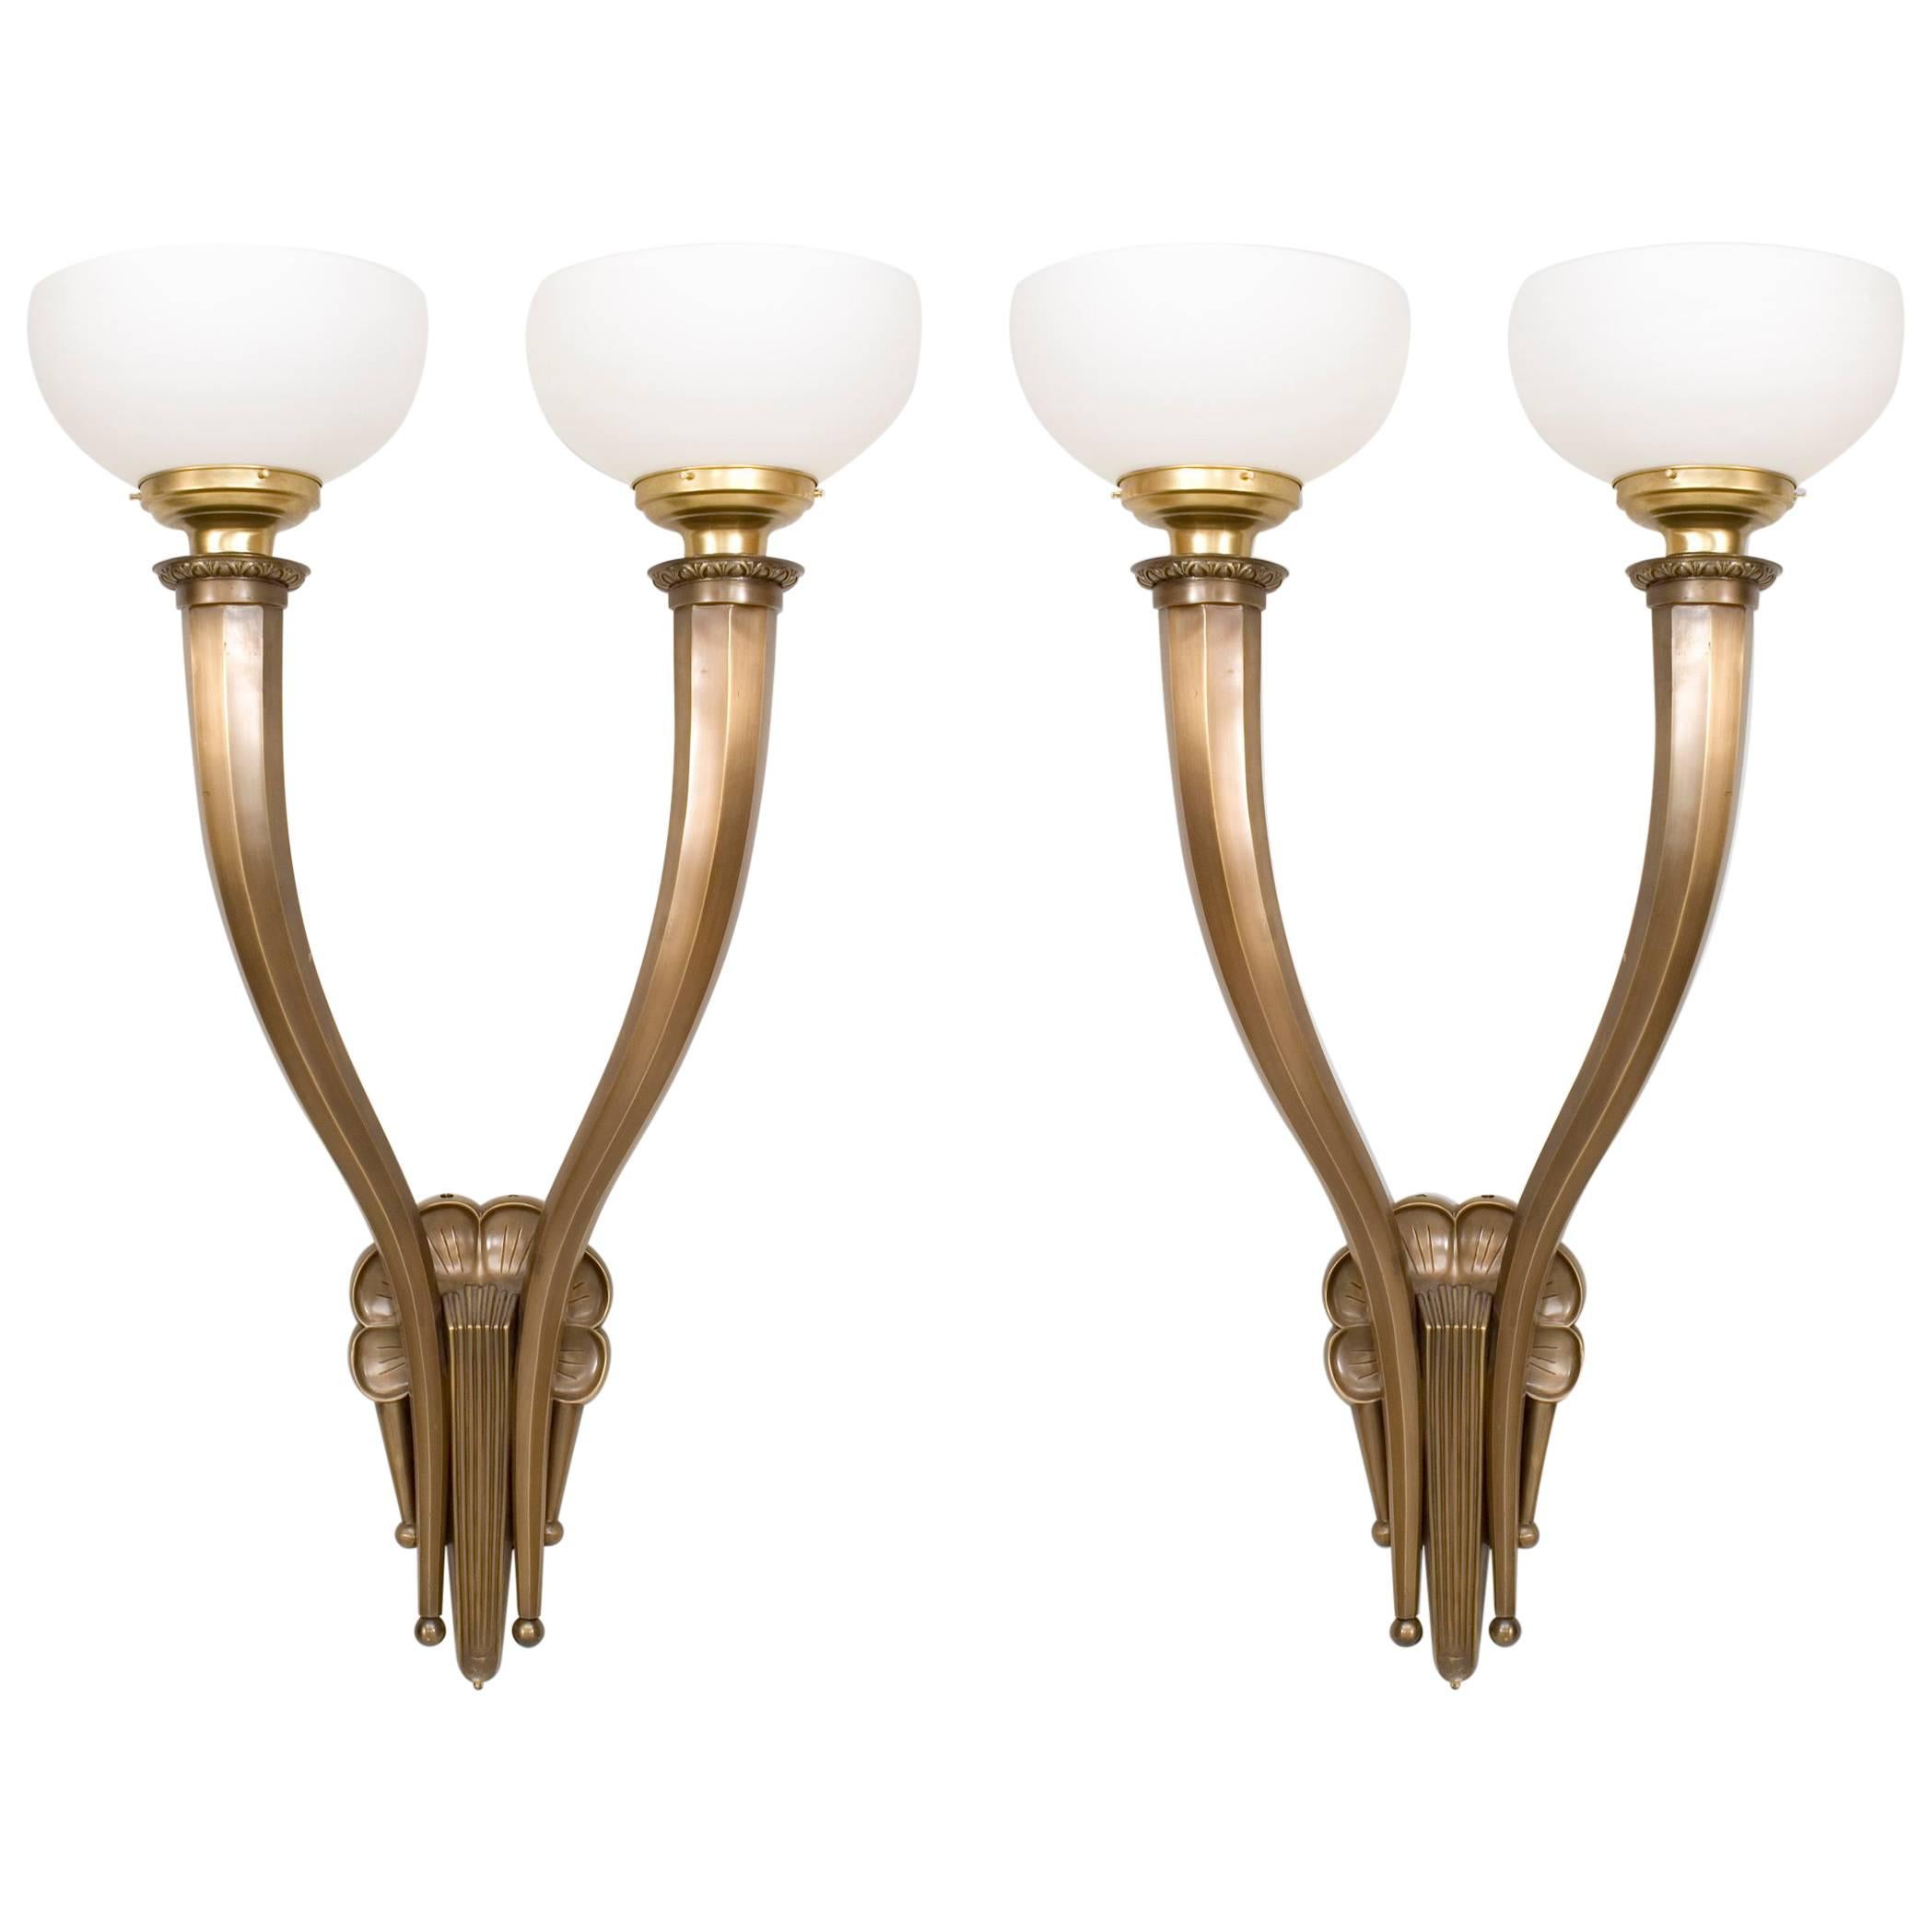 Pair of American Art Deco Monumental Brass and Glass Wall Sconces